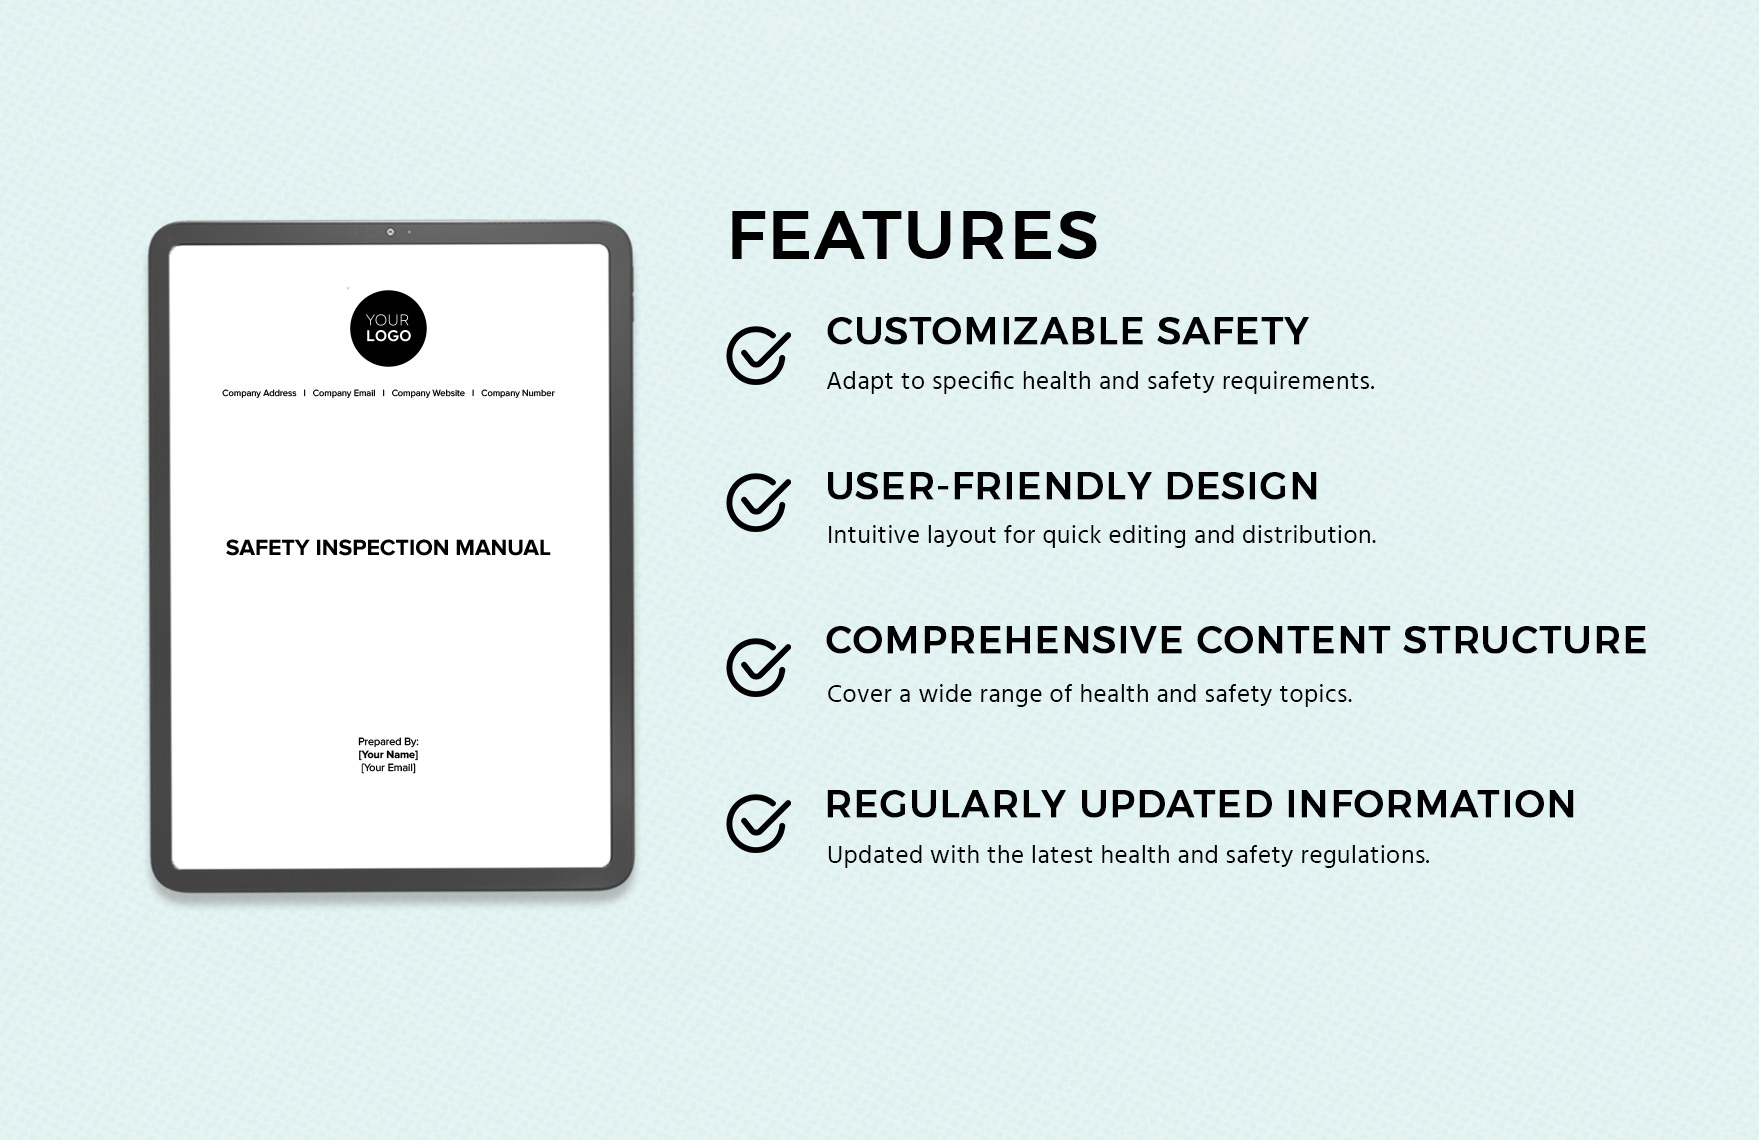 Safety Inspection Manual Template